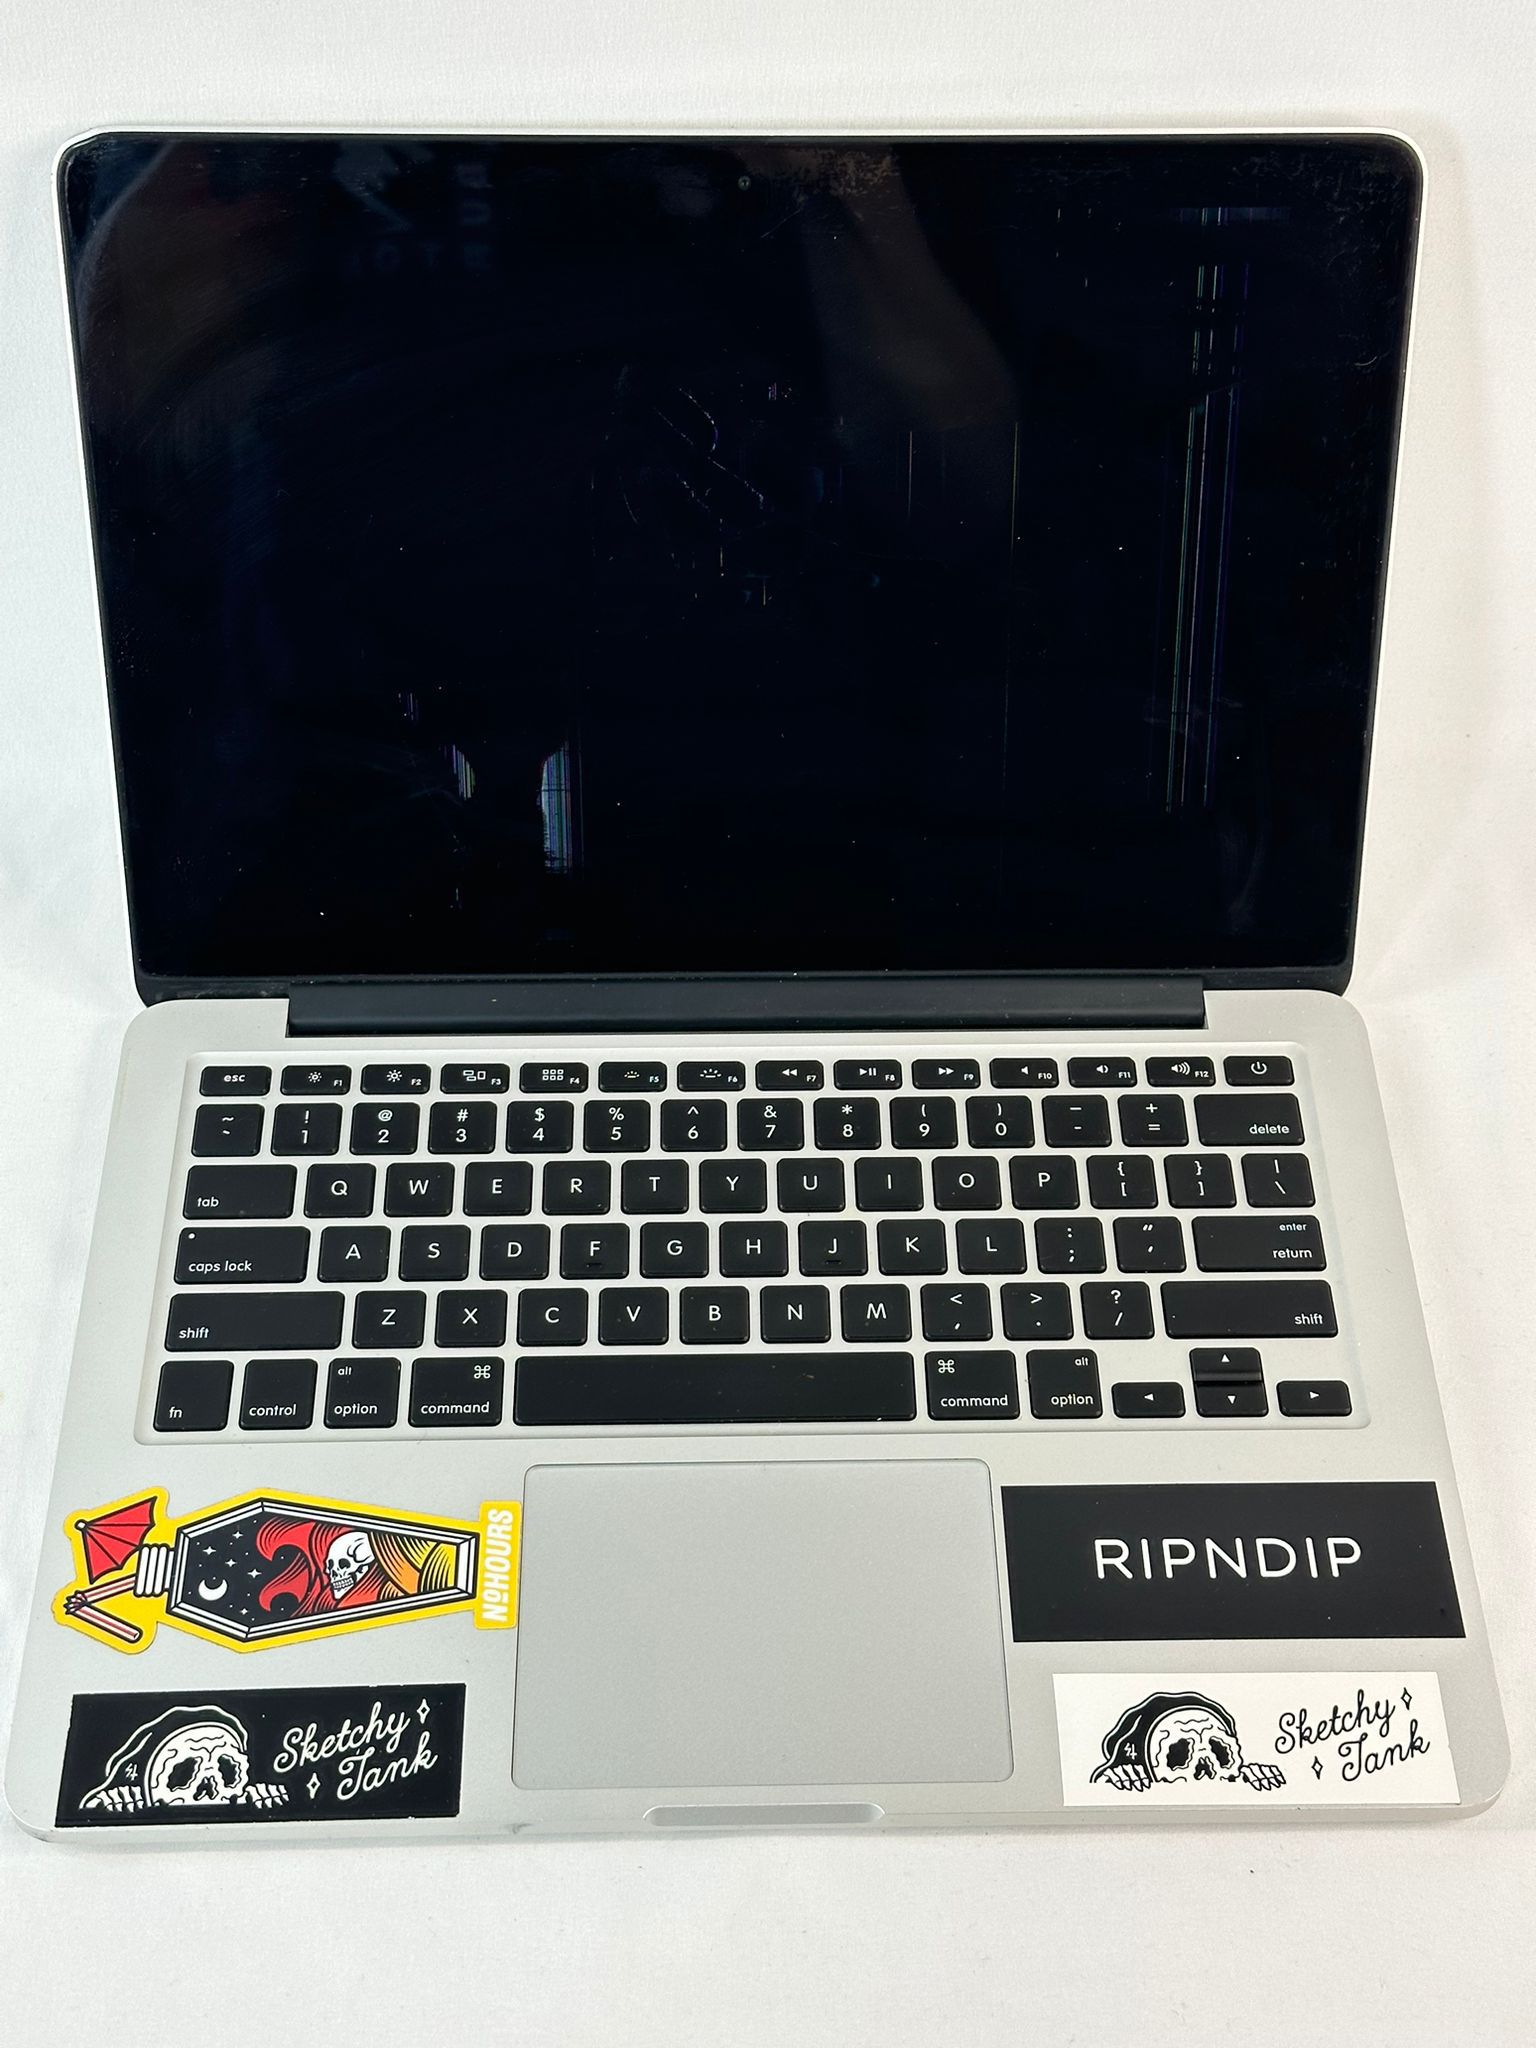 #1864 Apple MacBook Pro A1502 13.3 inch Laptop For Parts AS IS